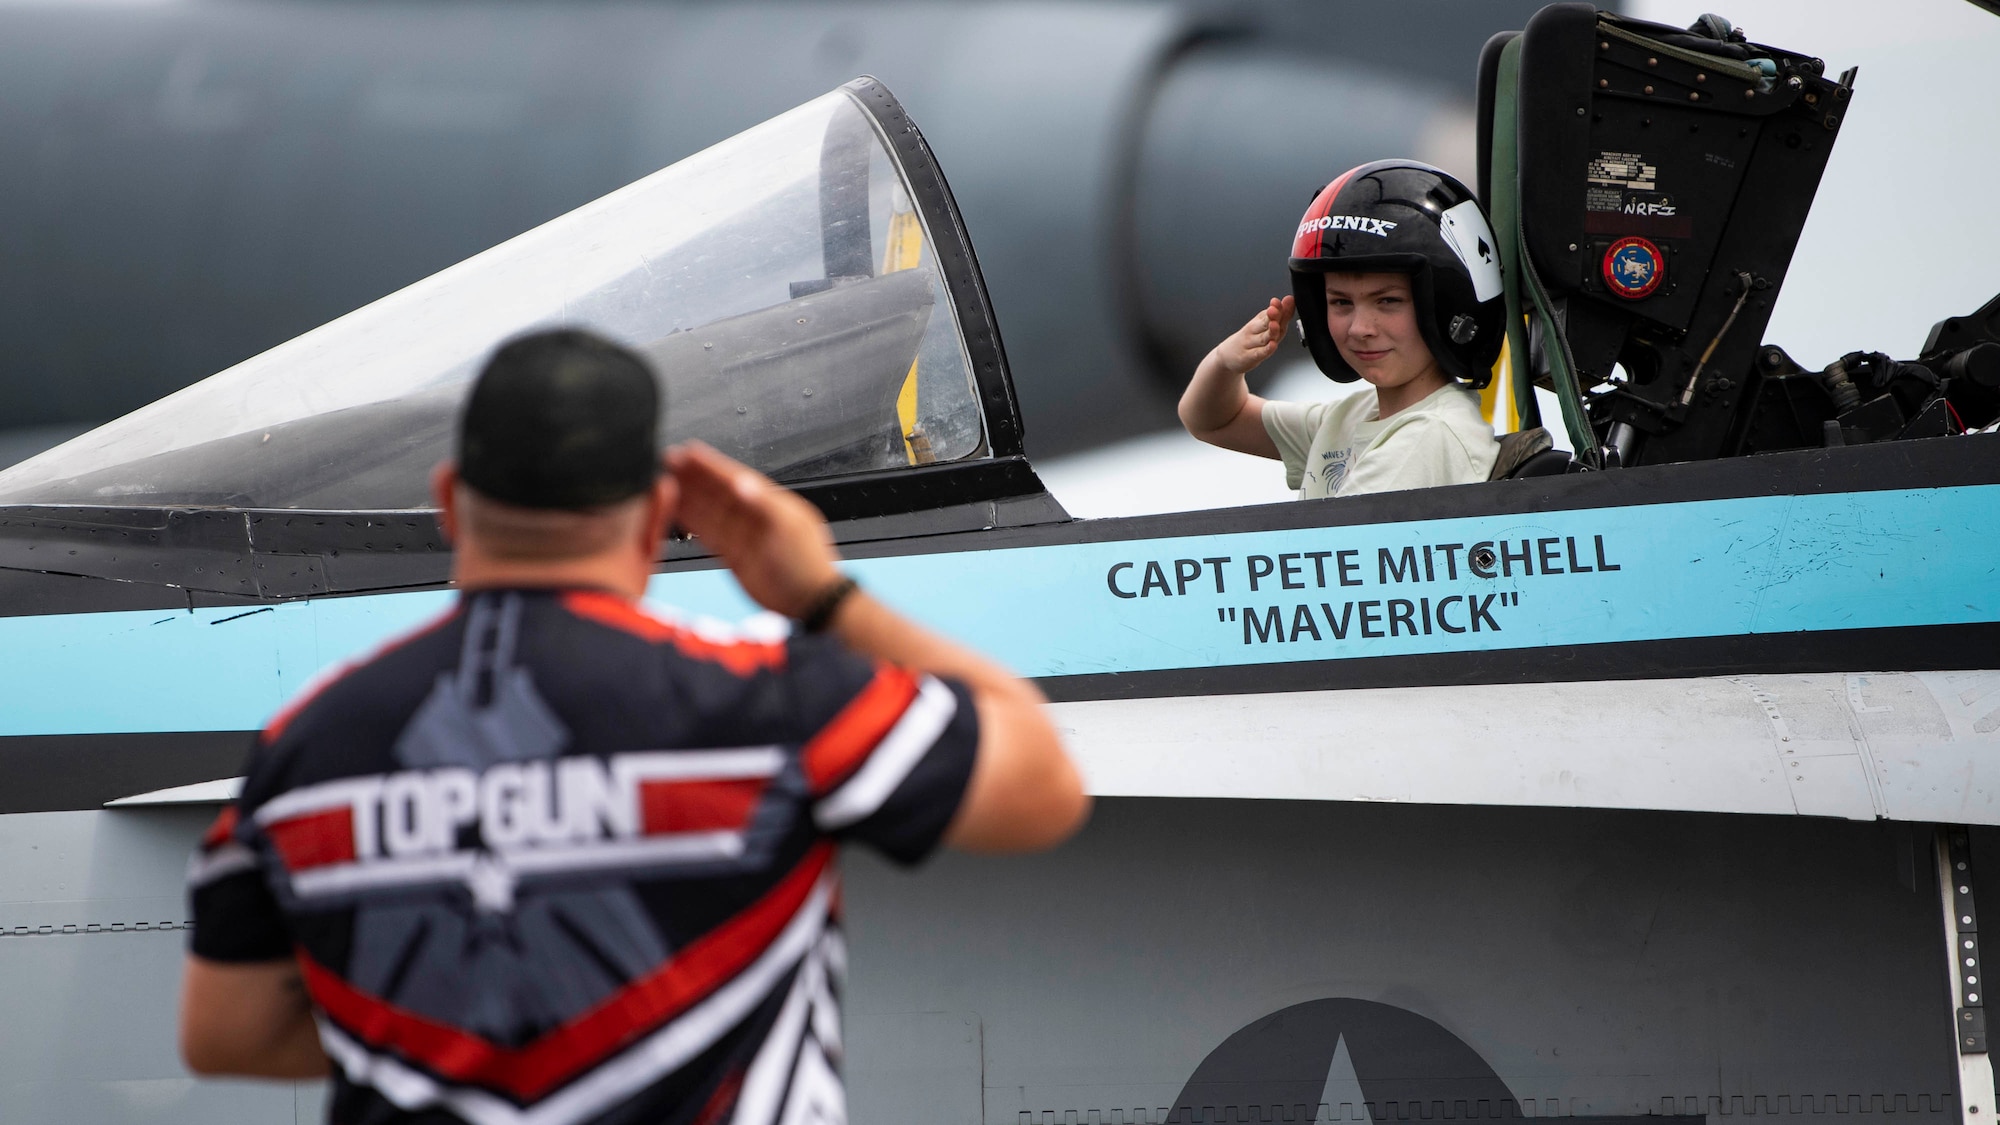 A spectator salutes while in a F-18 simulator during the 2022 Thunder Over Dover Airshow, May 22, 2022, at Dover Air Force Base, Delaware. The event was the first airshow and open house held at Dover AFB since September 2019. (U.S. Air Force photo by Tech. Sgt. J.D. Strong II)